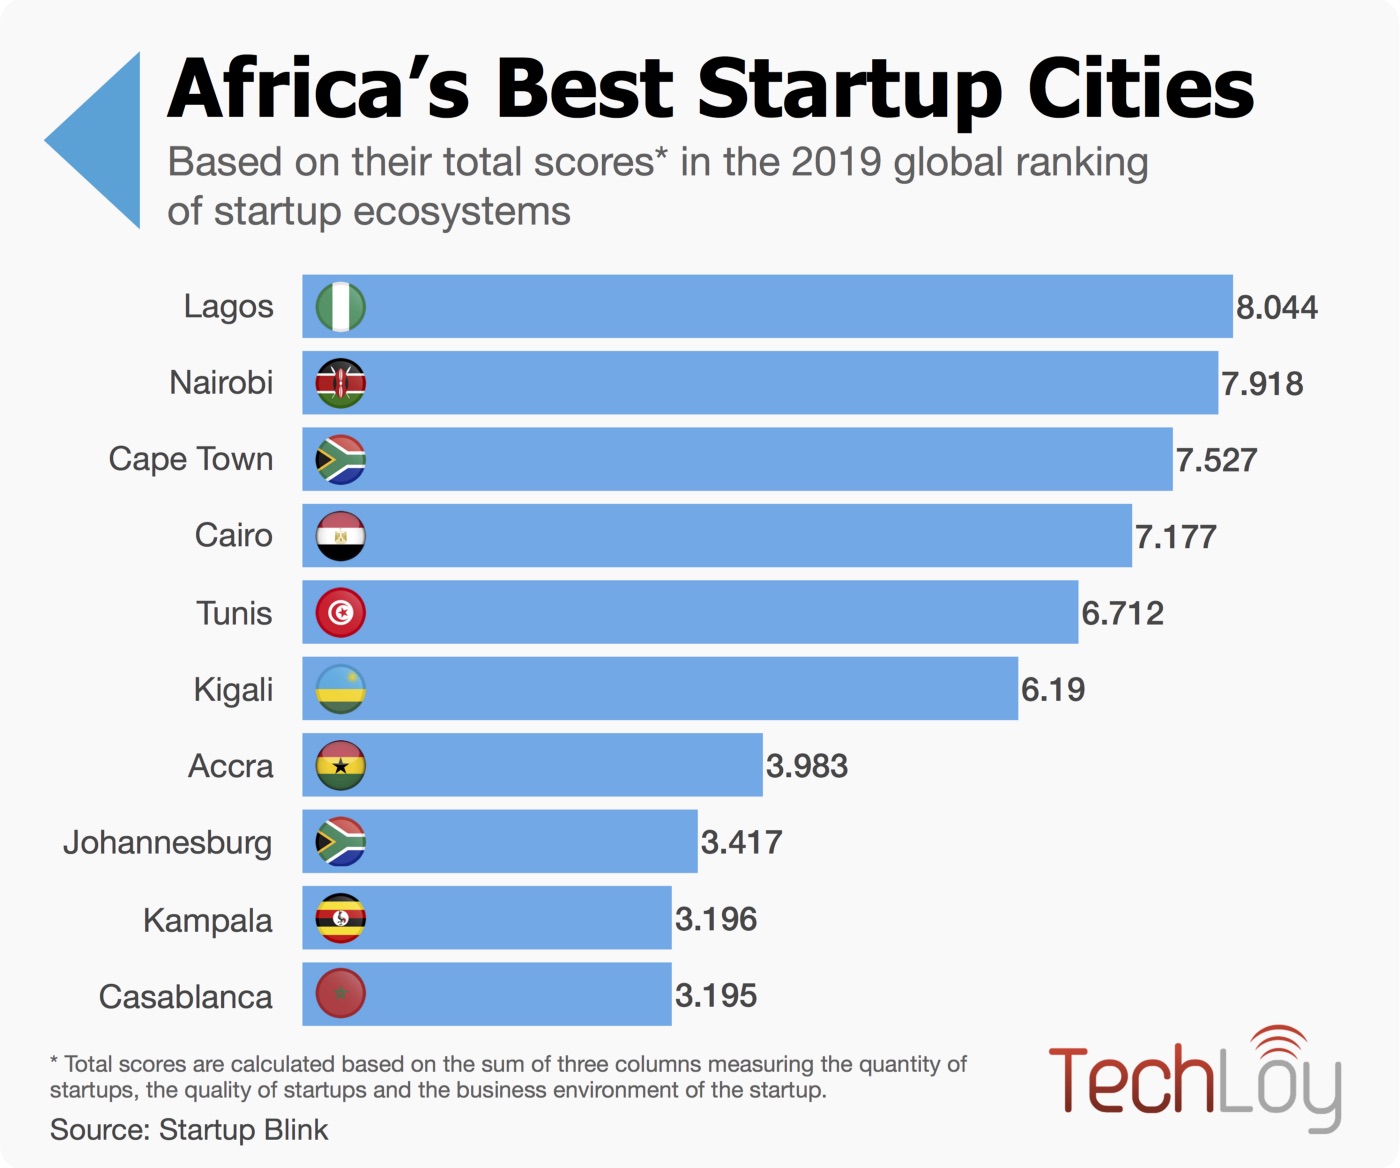 Infographic of the top startup cities in Africa